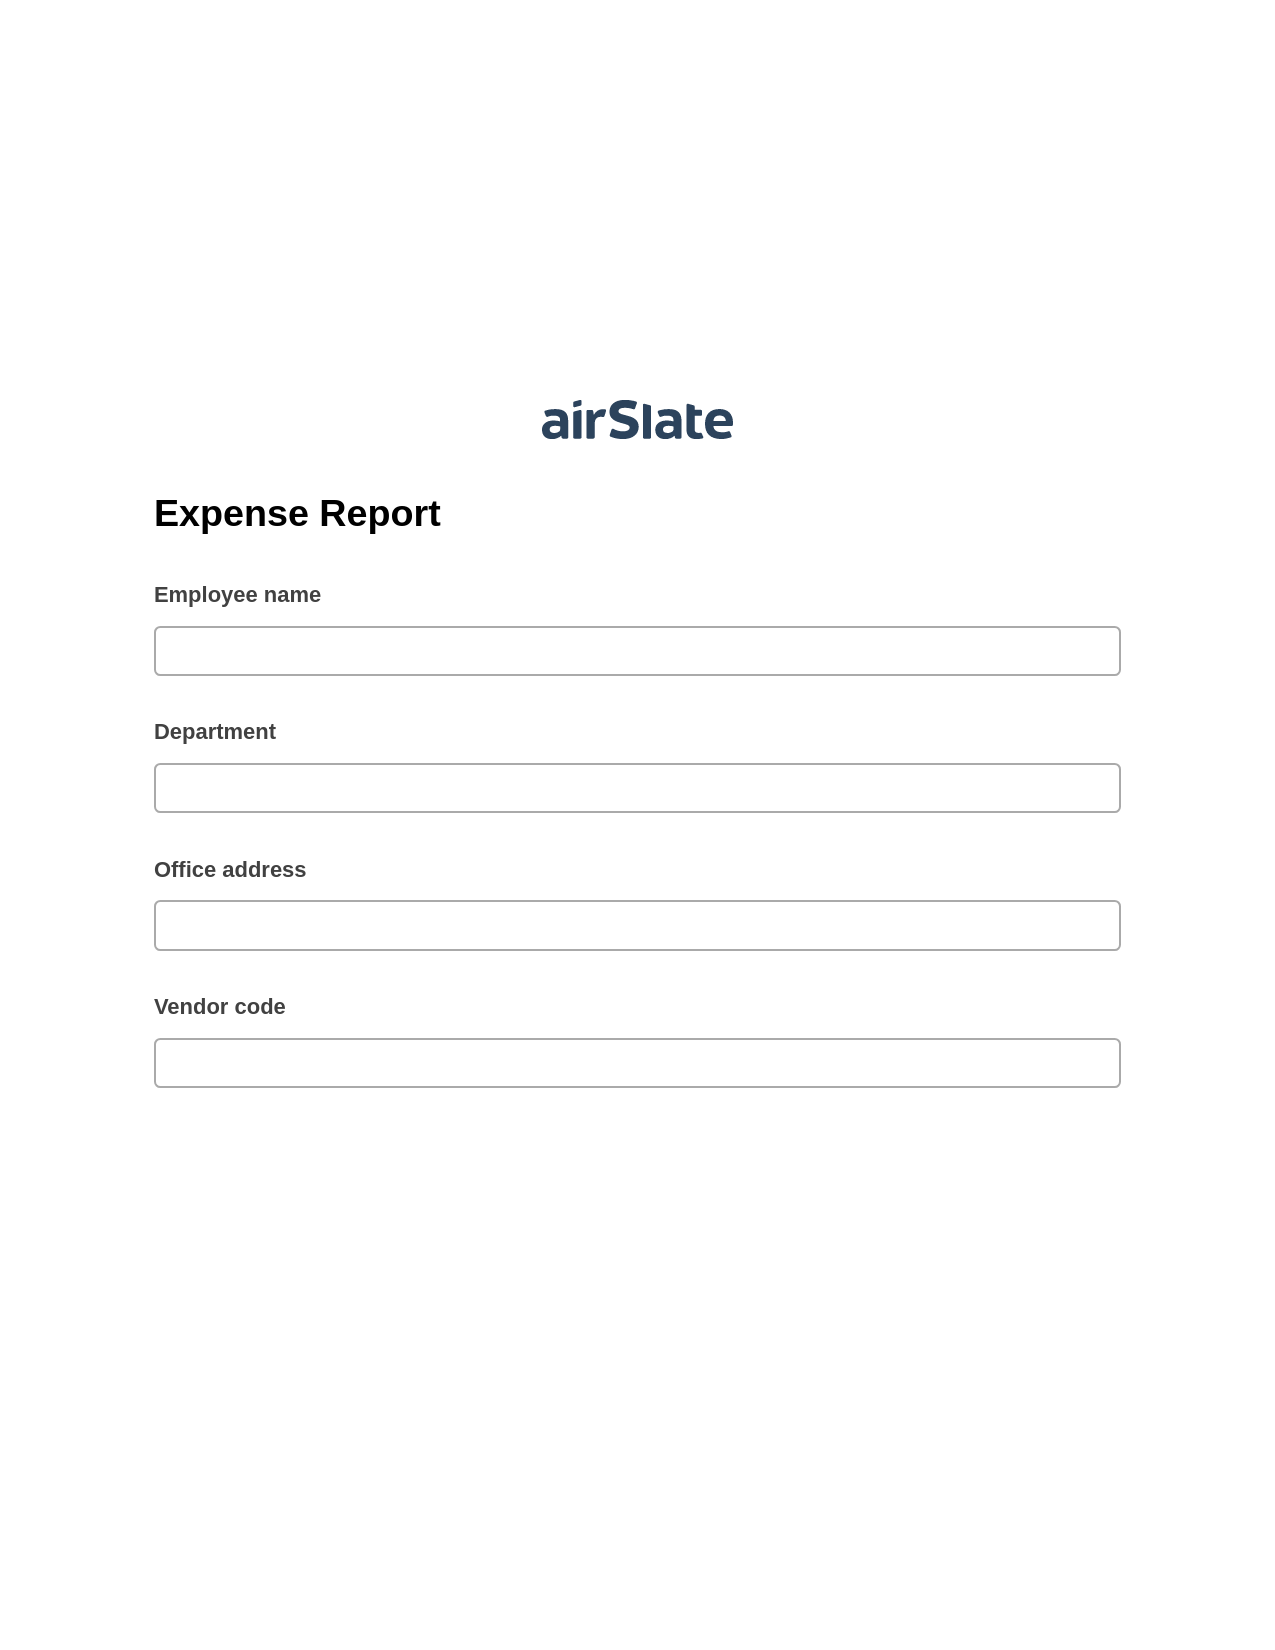 Multirole Expense Report Pre-fill from CSV File Bot, Hide Signatures Bot, Export to NetSuite Record Bot